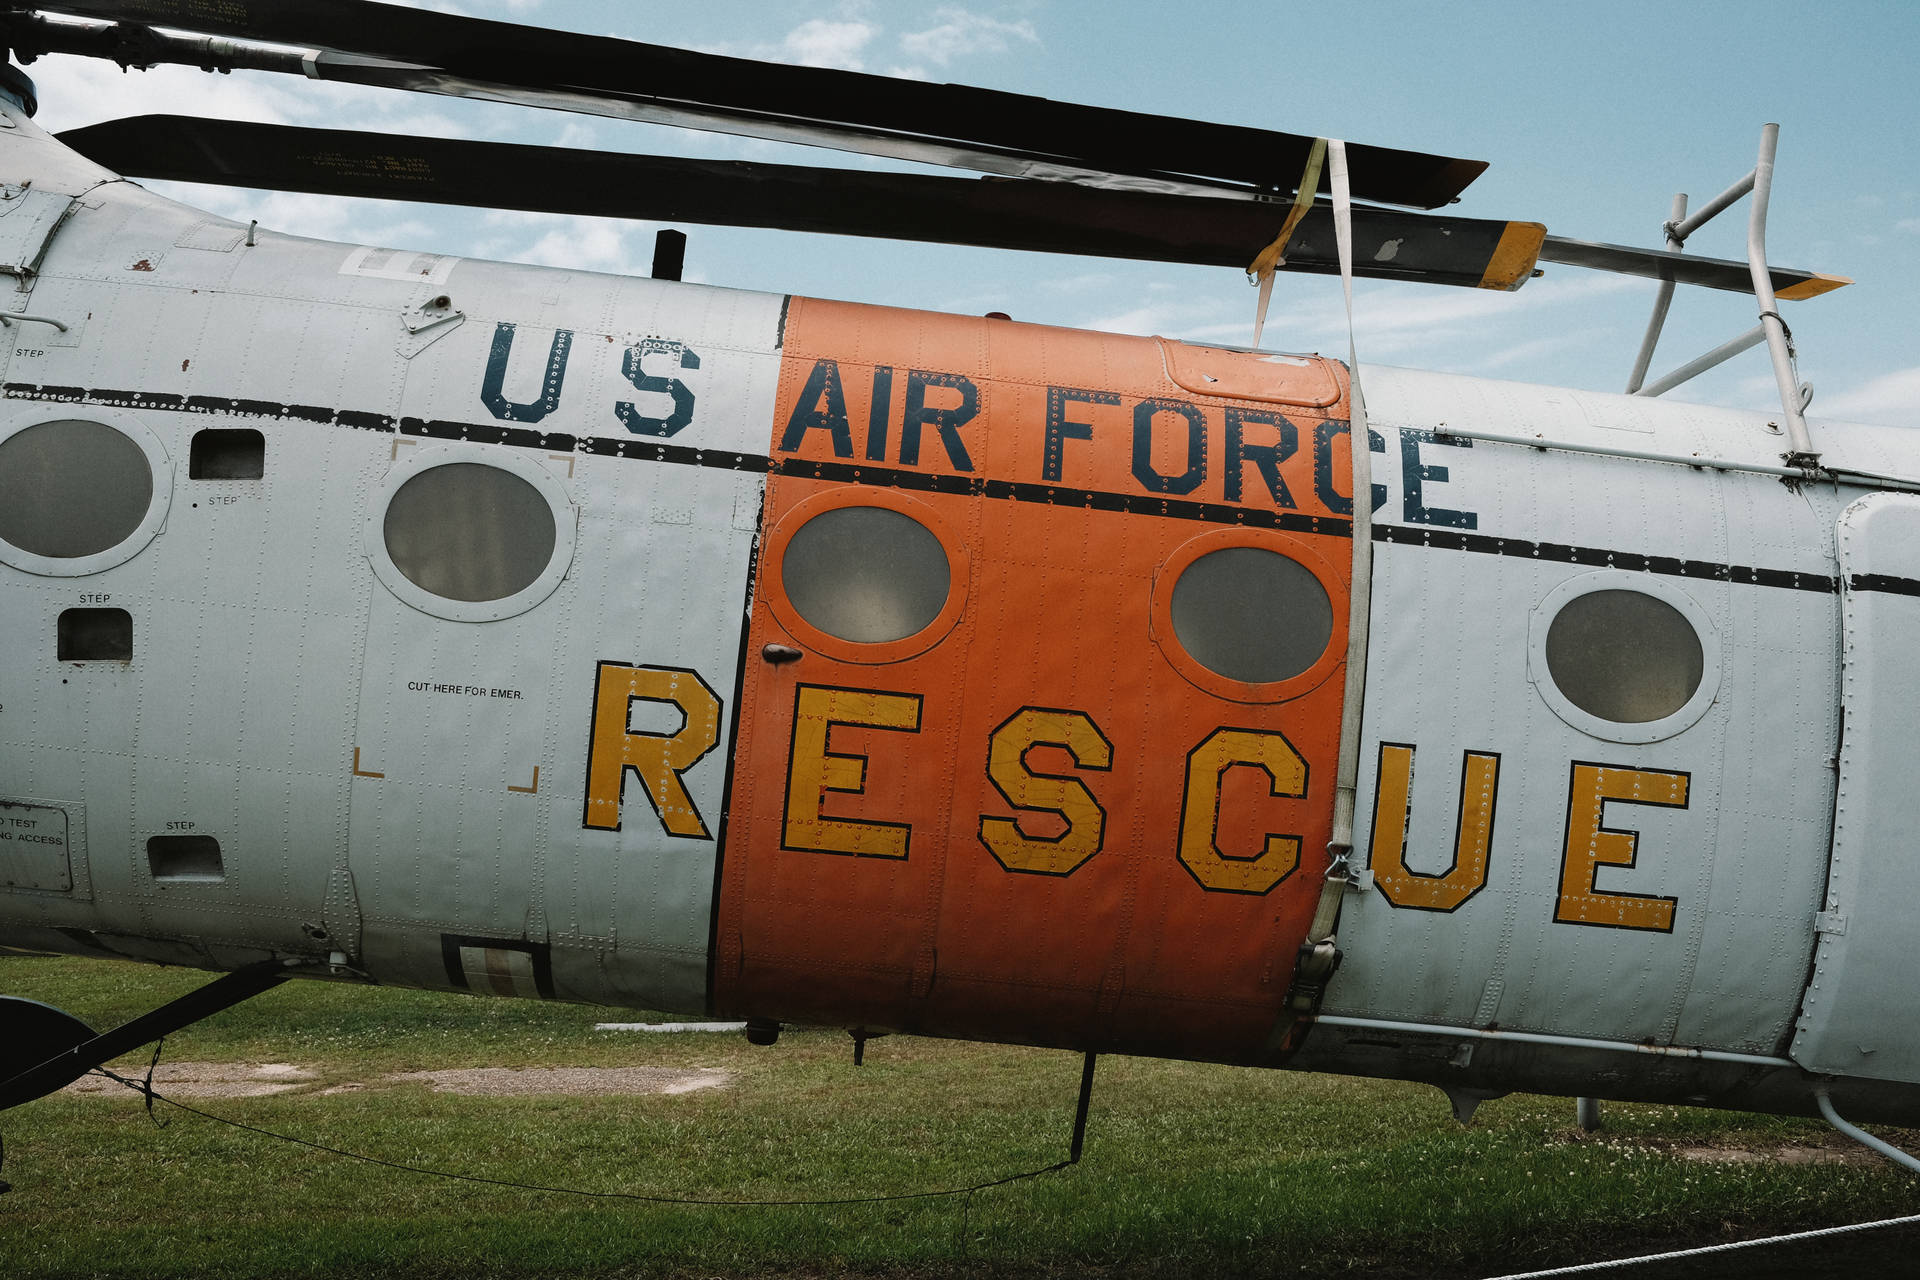 Us Air Force Rescue Plane Background